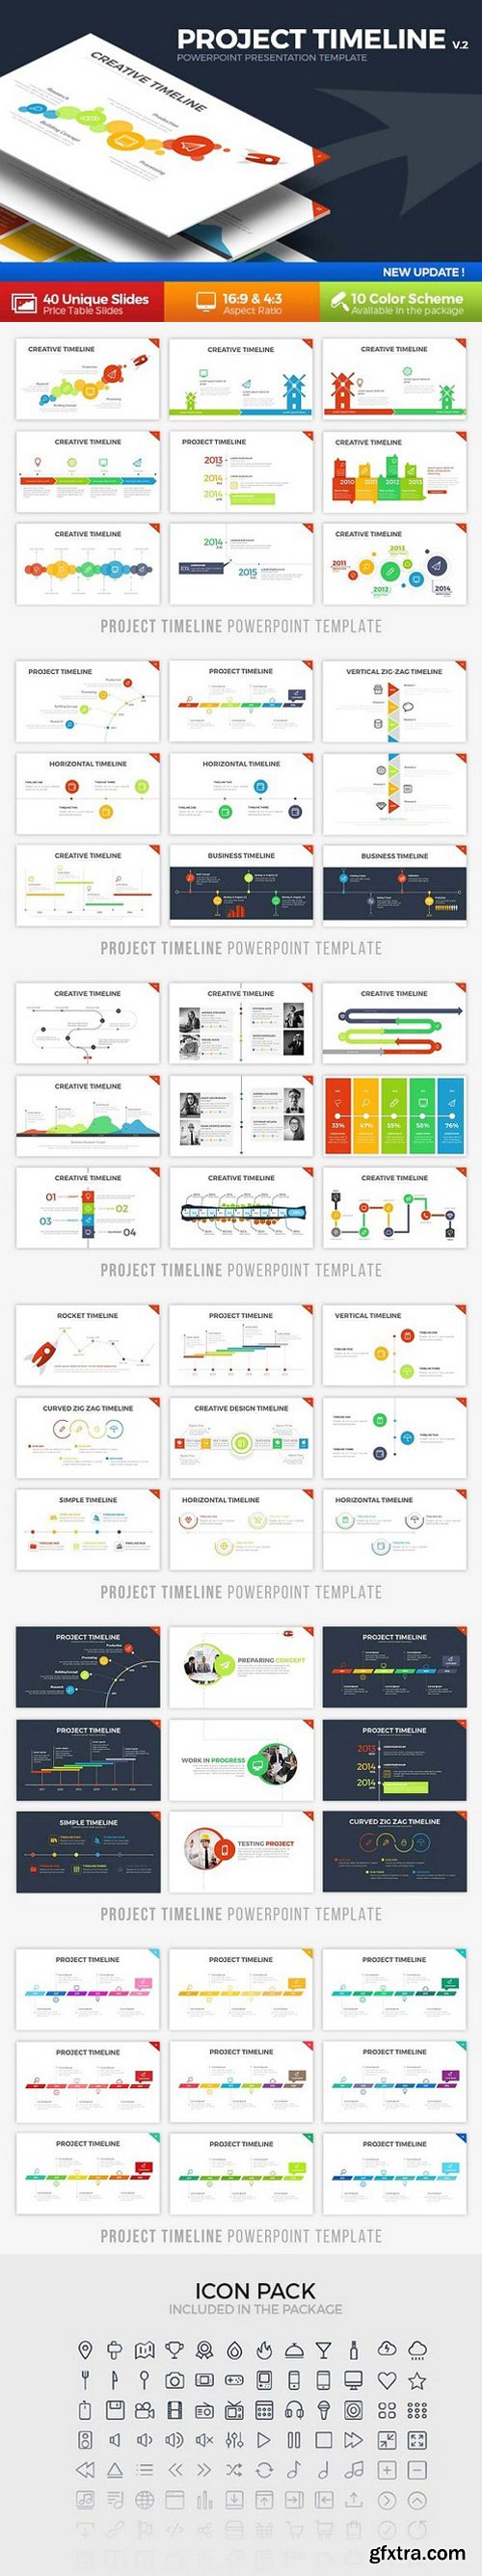 CM - Project Timeline Powerpoint Template 1277424